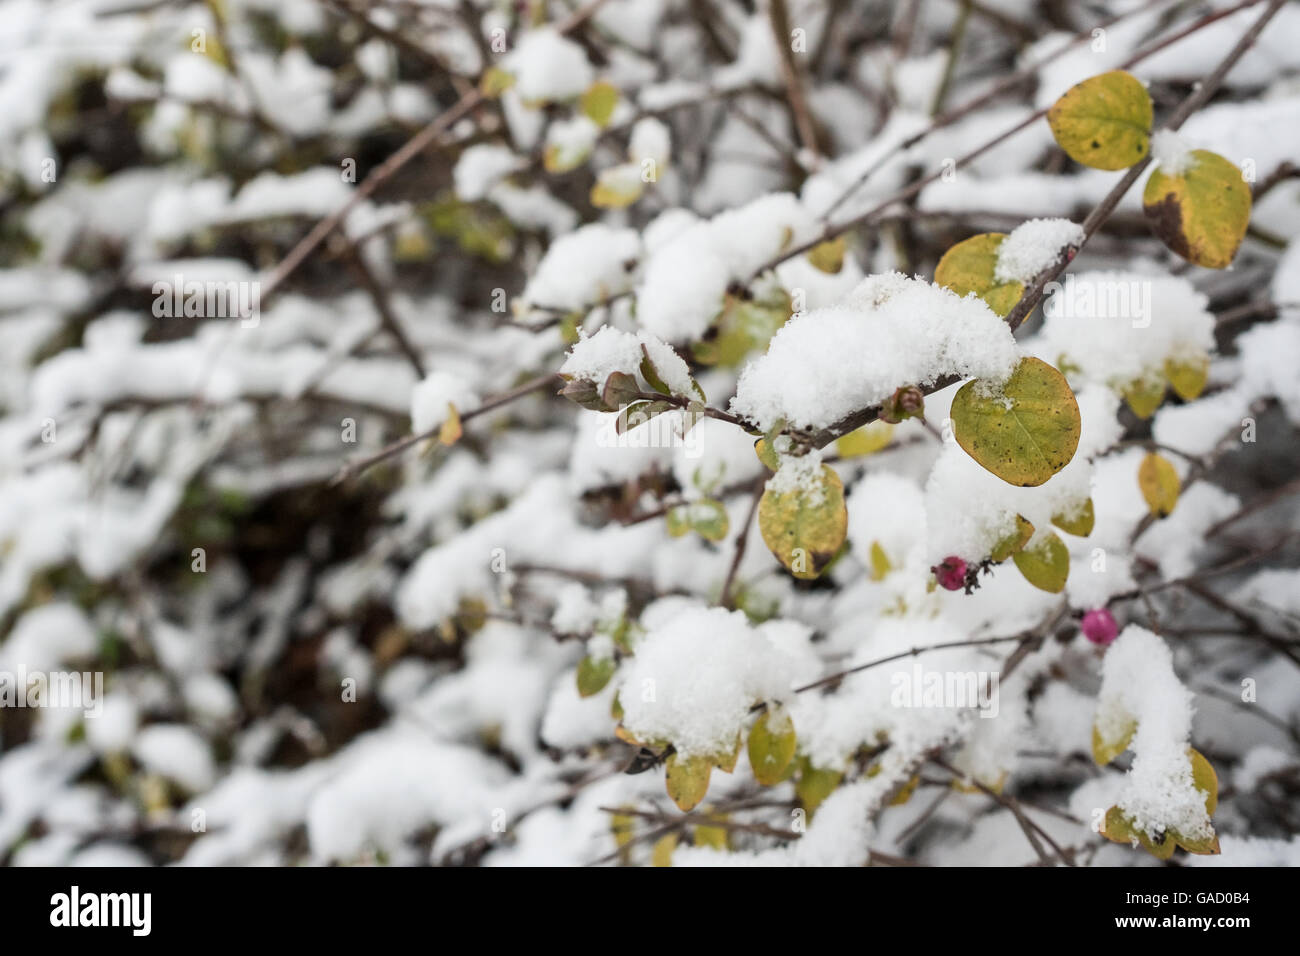 Bush of cotoneaster with violet fruits and snow Stock Photo